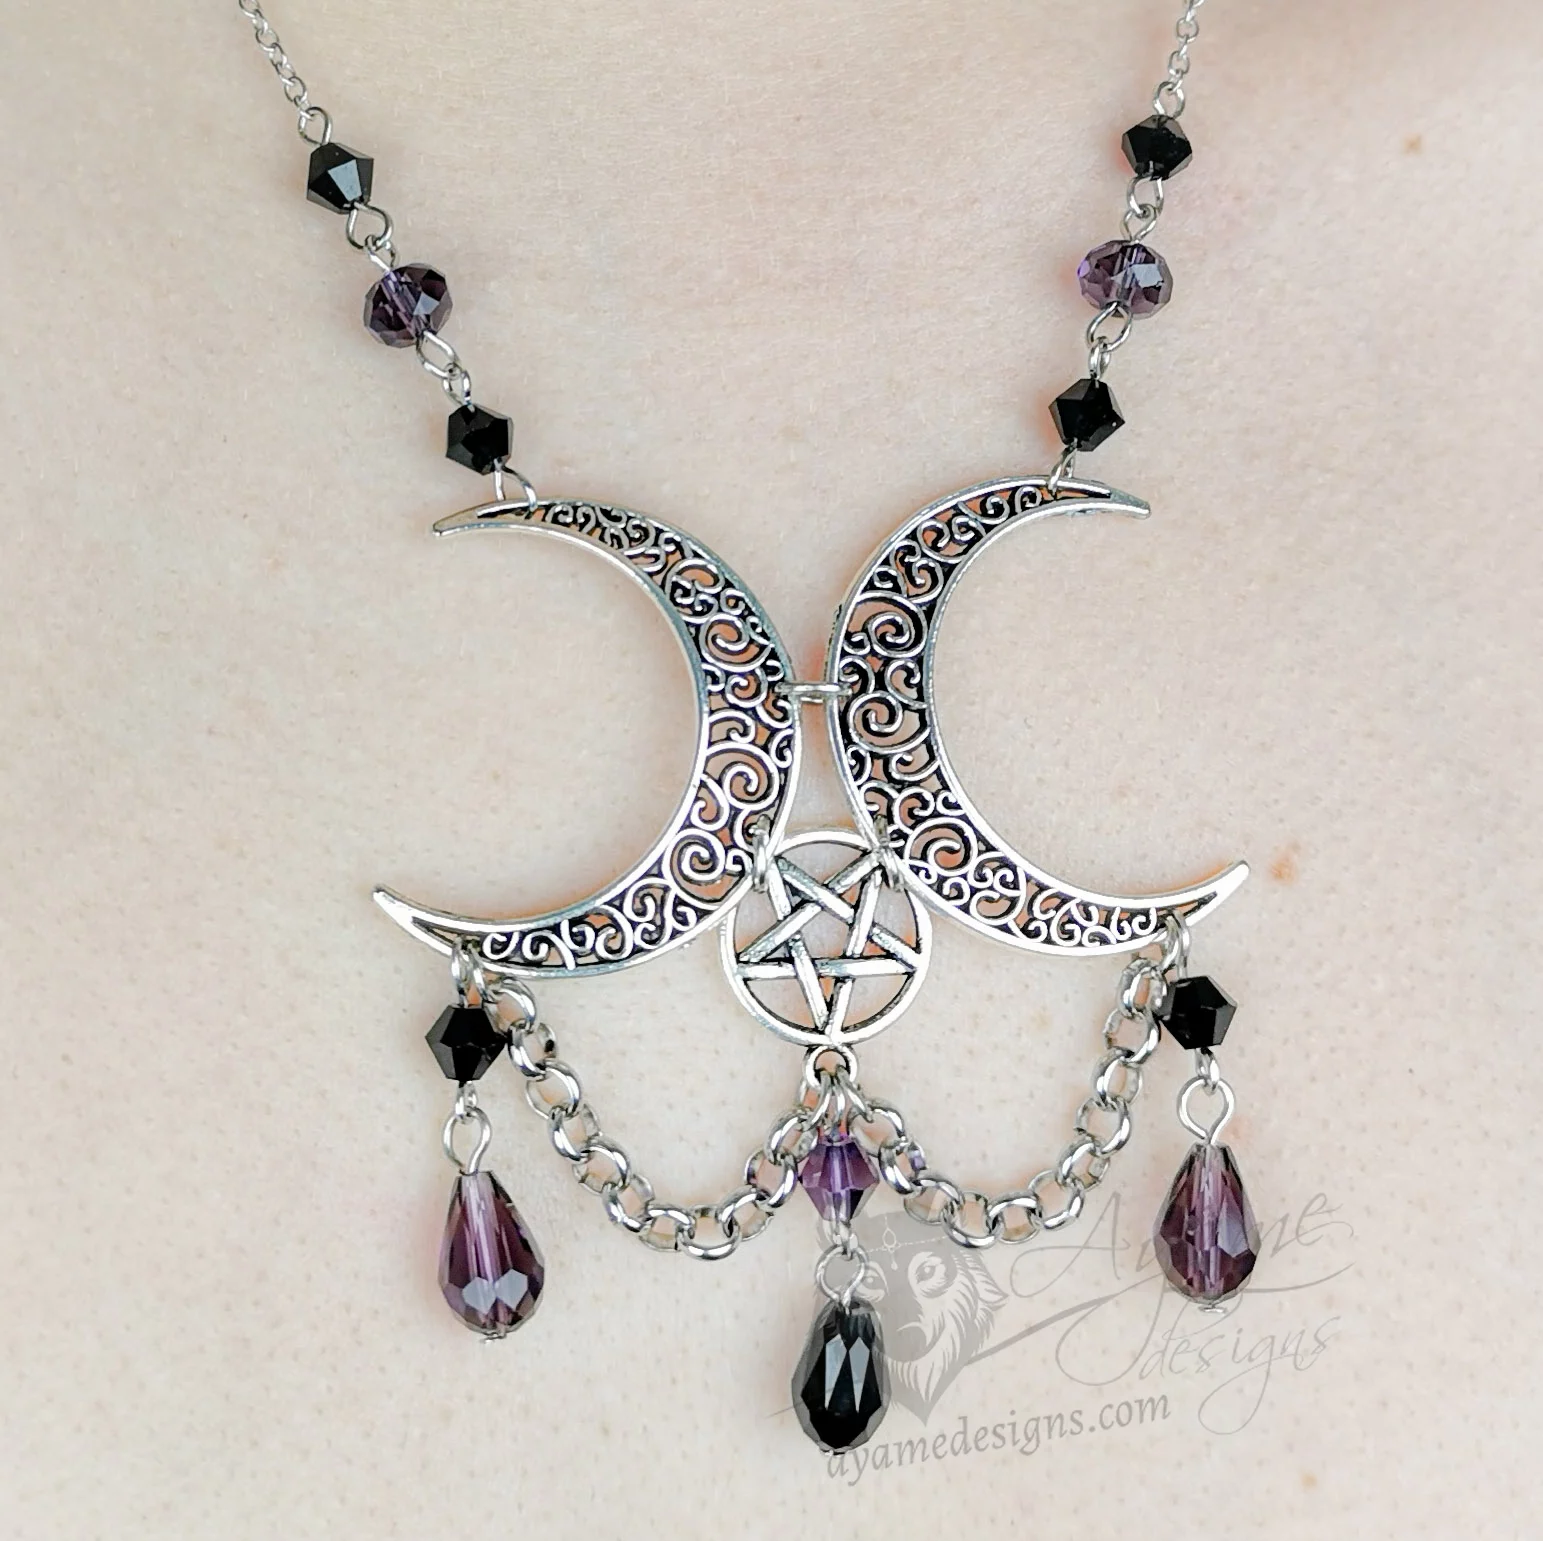 Handmade pagan triple moon necklace with filigree moons, an inverted pentacle, black and purple Austrian crystal beads, and stainless steel chain details